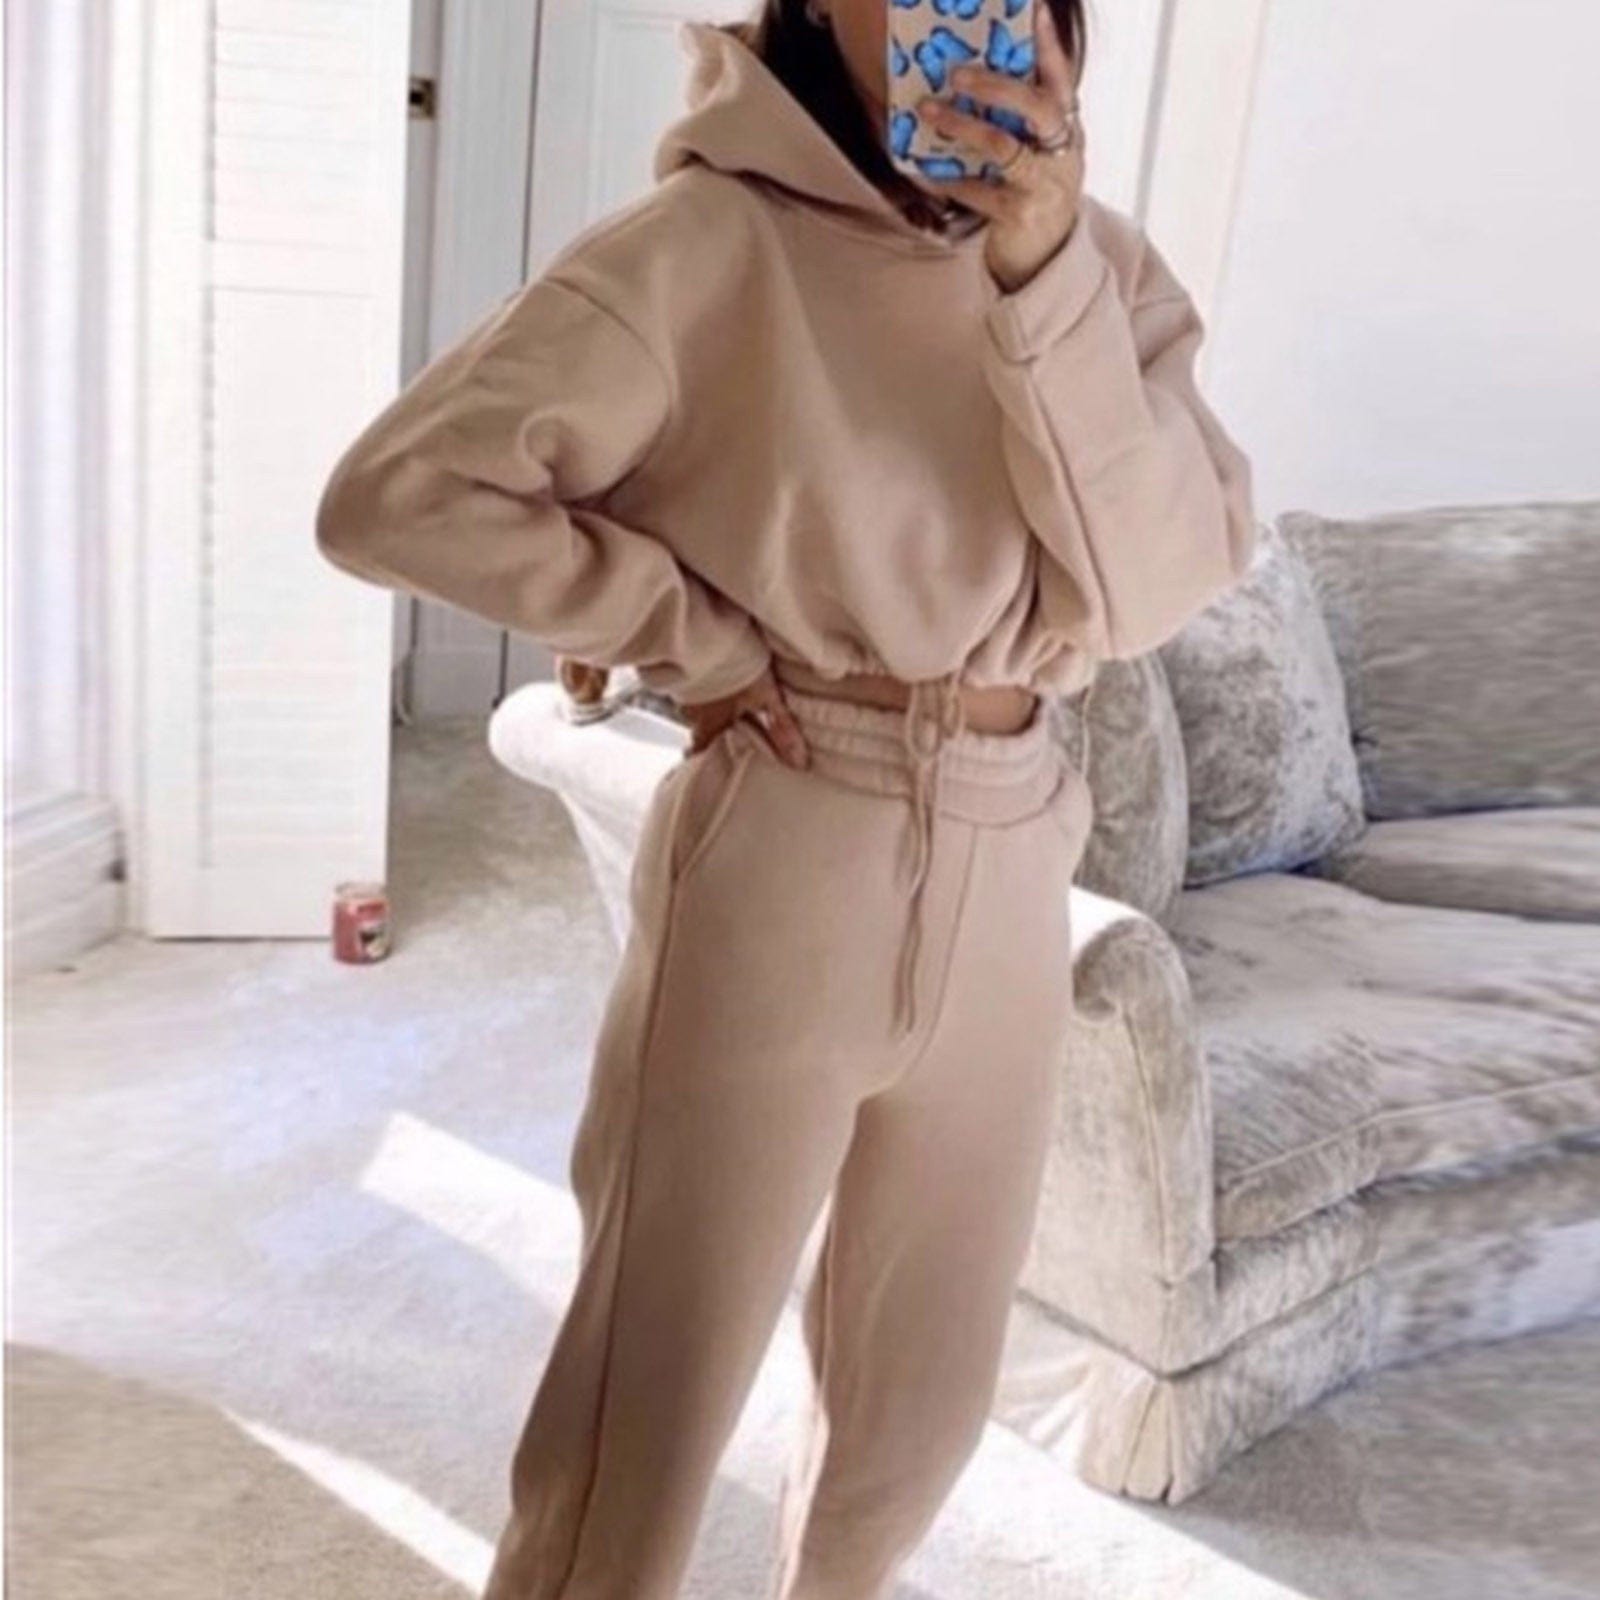 ALLRJ Jogging suit Jogging Suits For Women 2 Piece Sweatsuits Tracksuits Sexy Long Sleeve HoodieCasual Fitness Sportswear